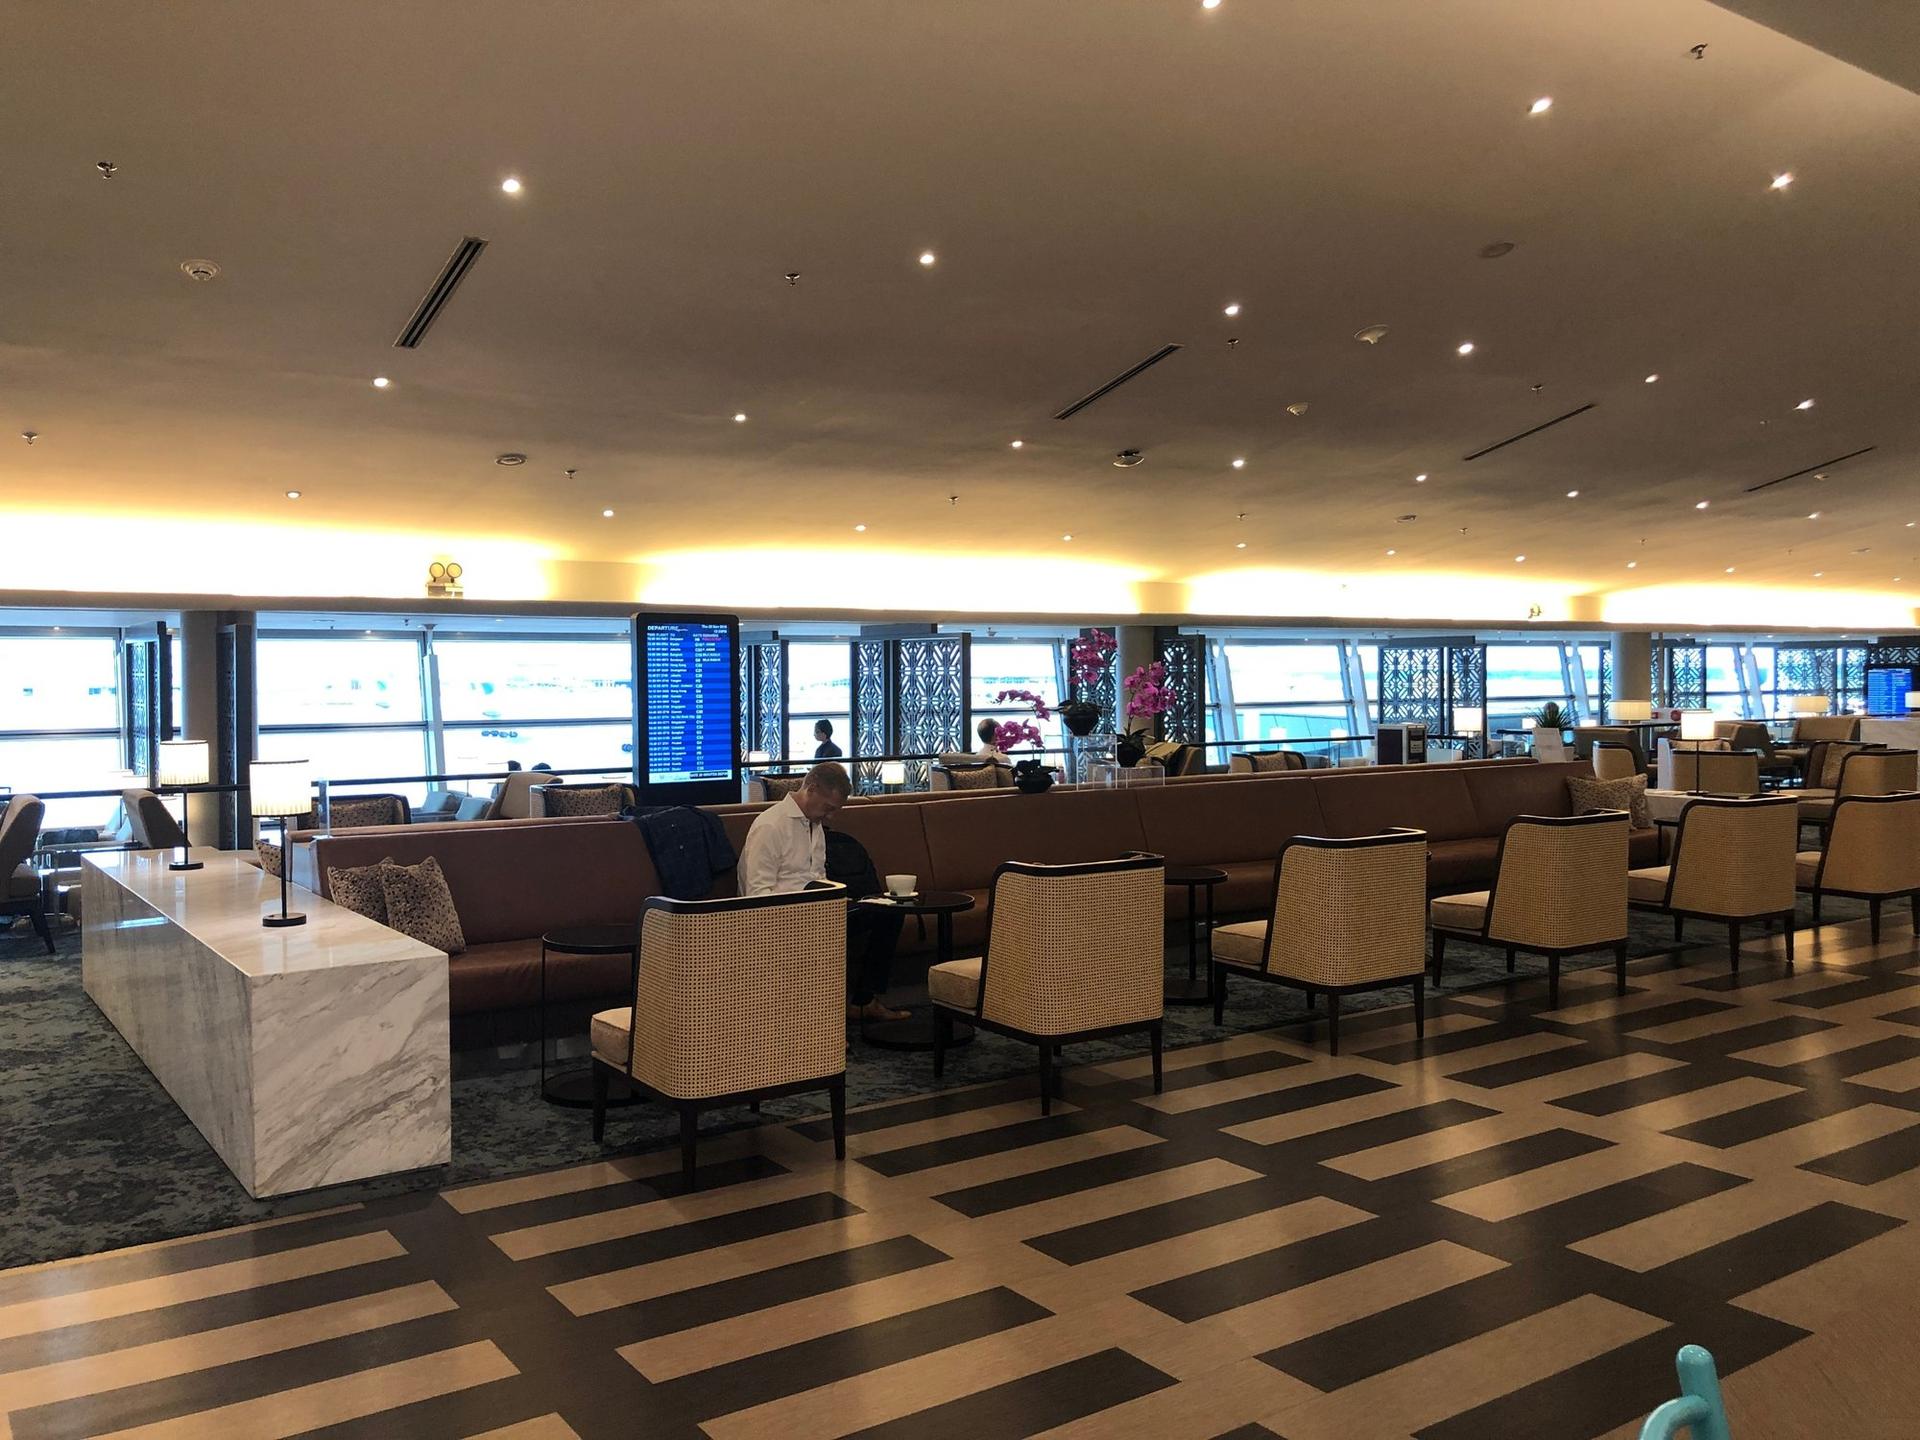 Malaysia Airlines Golden Business Class Lounge image 18 of 27